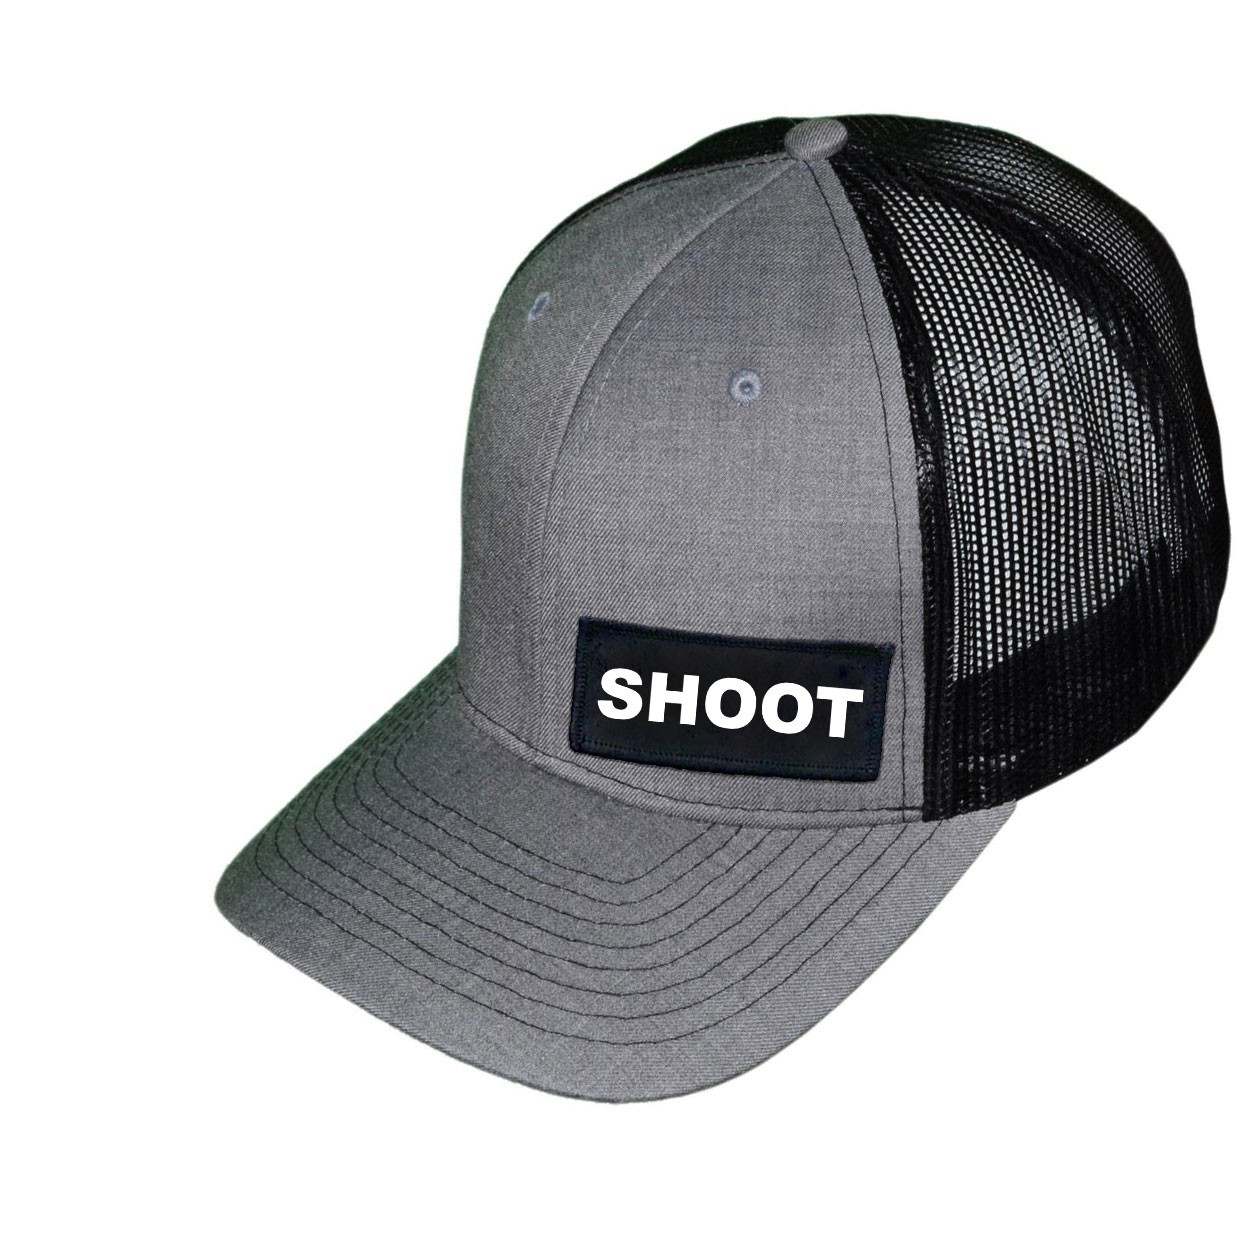 Shoot Brand Logo Night Out Woven Patch Snapback Trucker Hat Heather Gray/Black